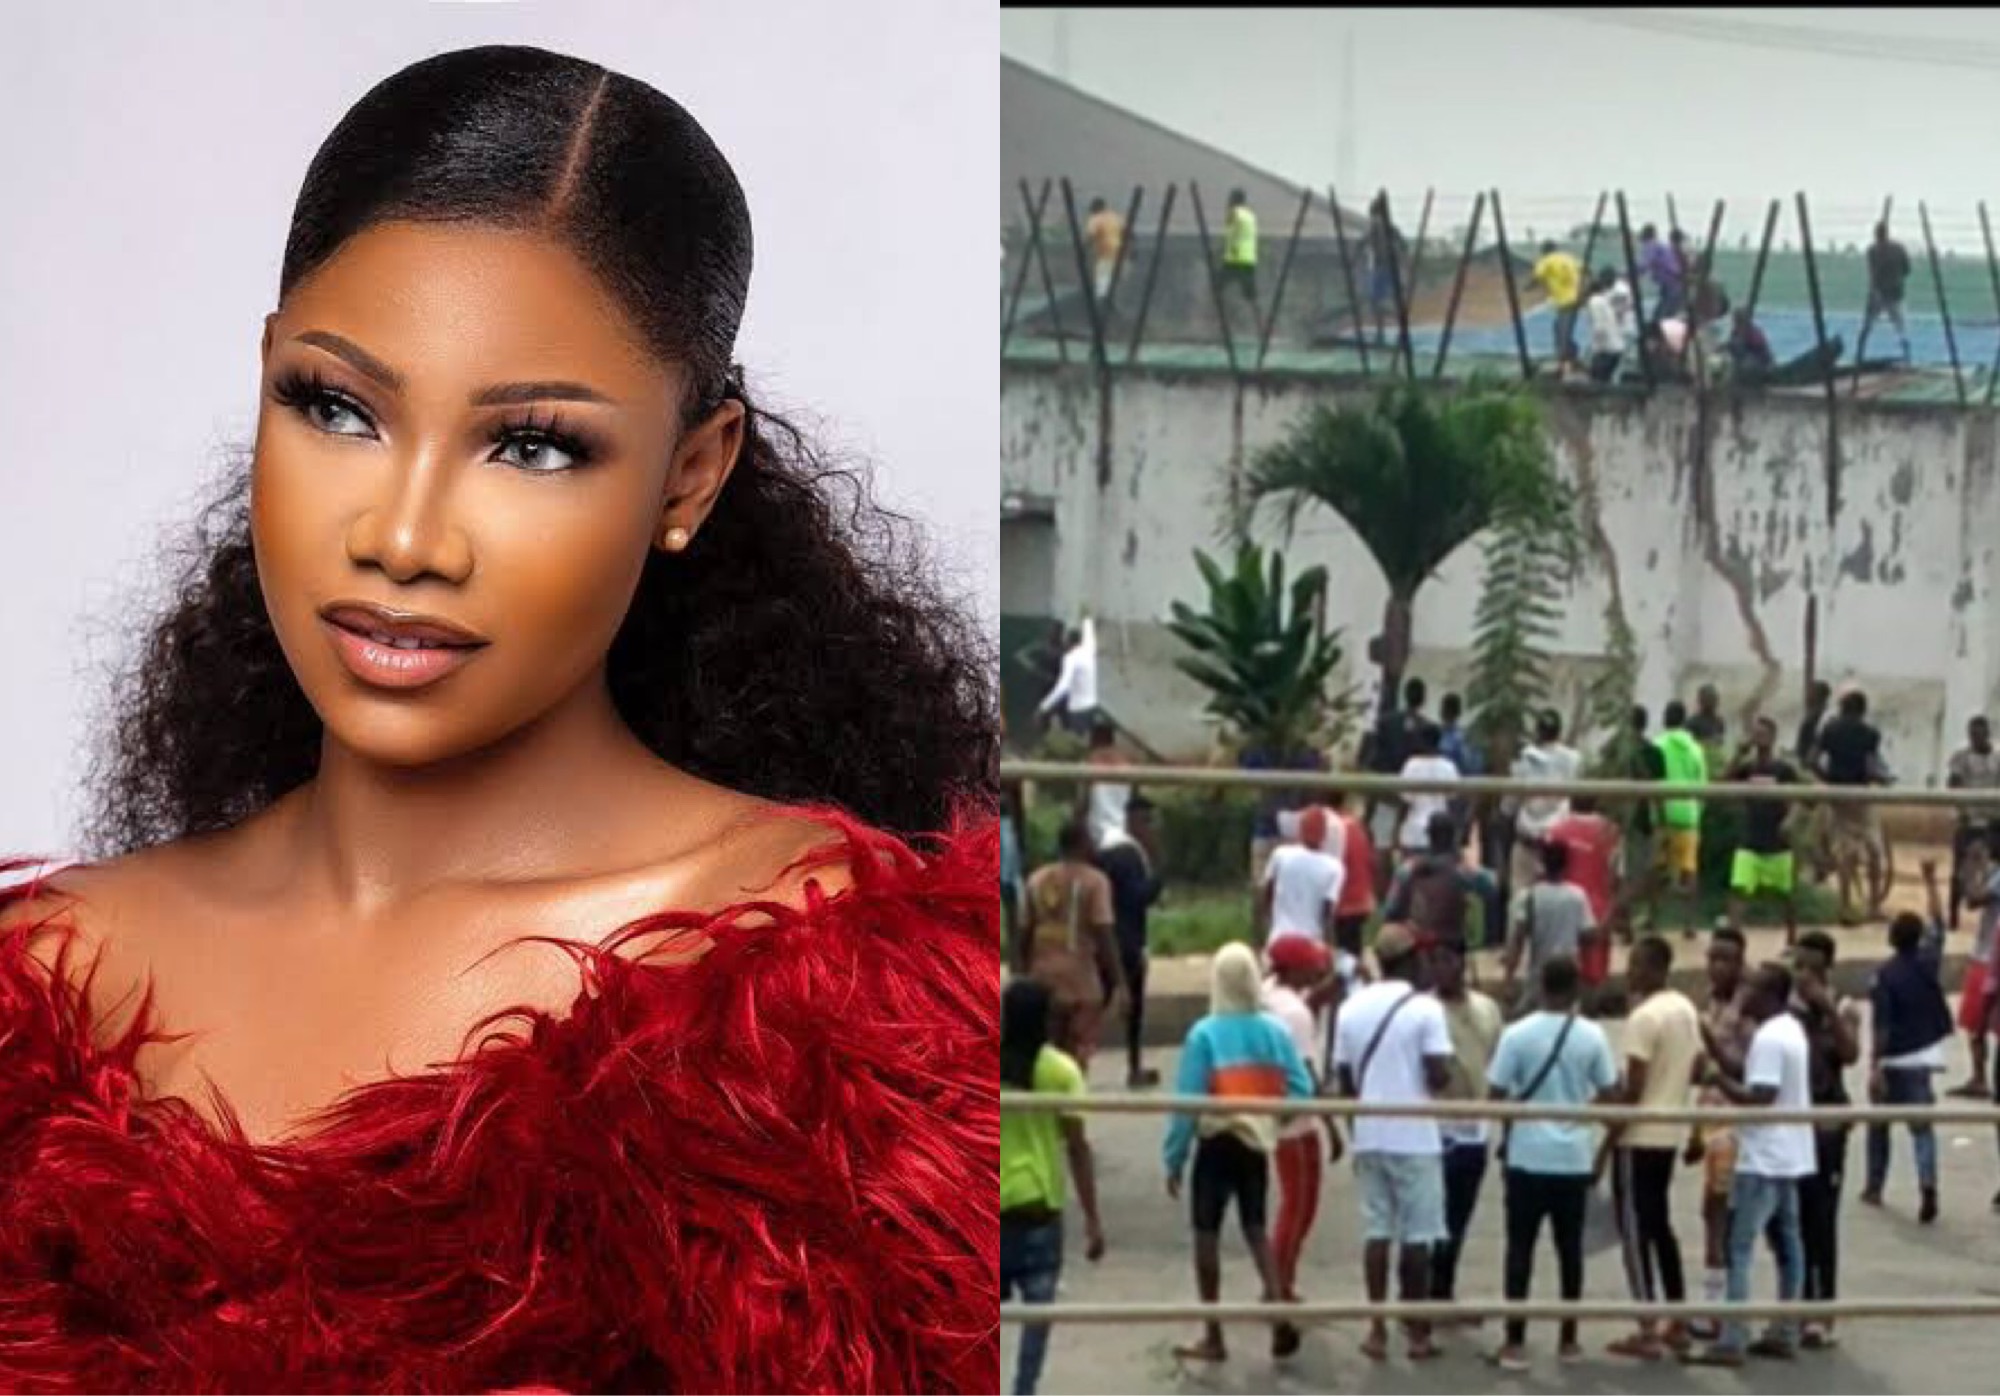 “Those Inmates In Benin Were Illegally Released By Authorities” - BBNaija’s Tacha Claims